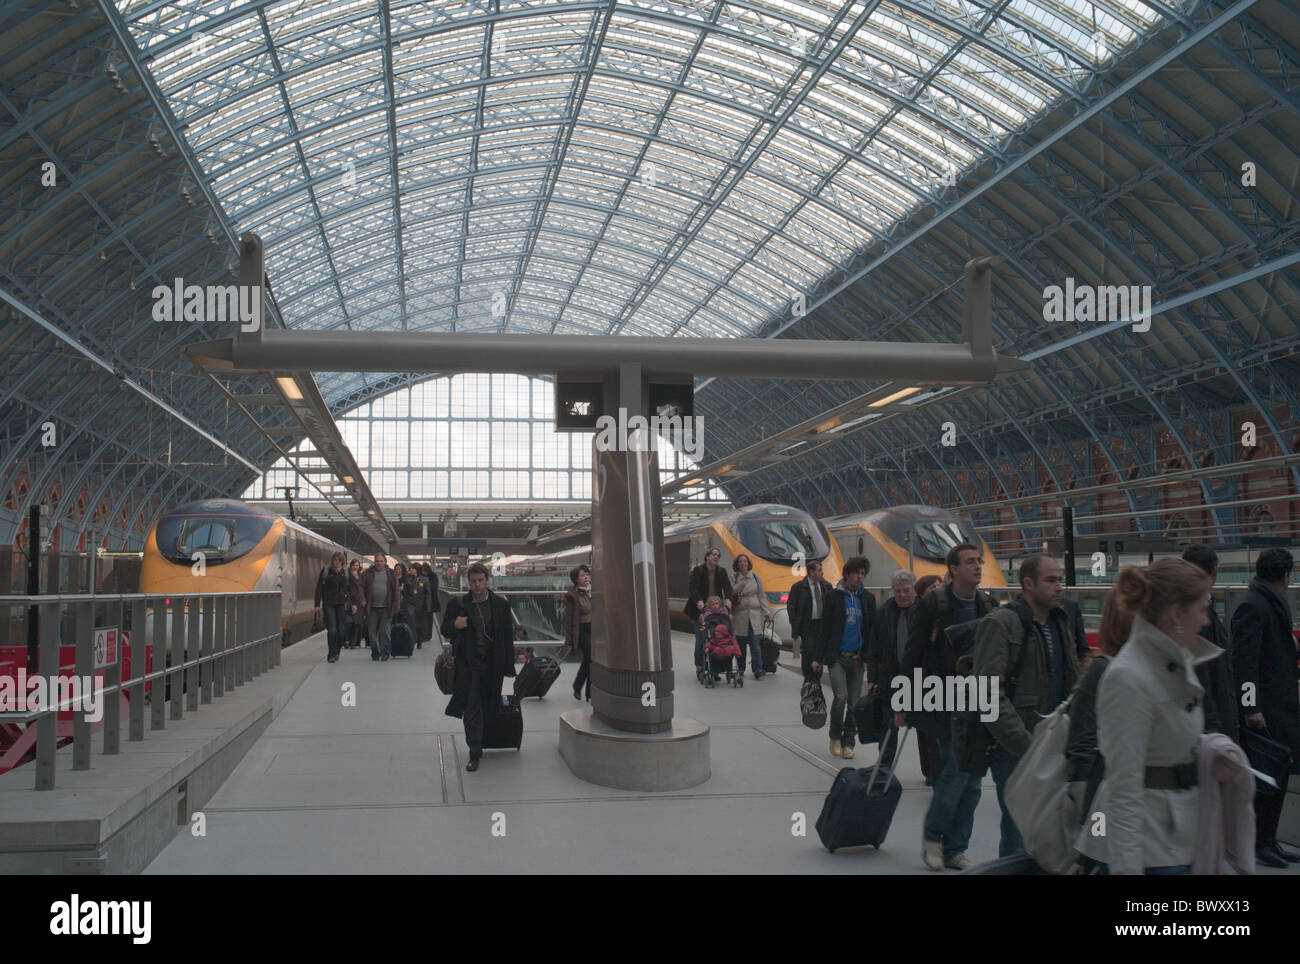 Passengers arrive on high-speed Eurostar trains on the Upper Level in St. Pancras station in London, England, UK. Stock Photo